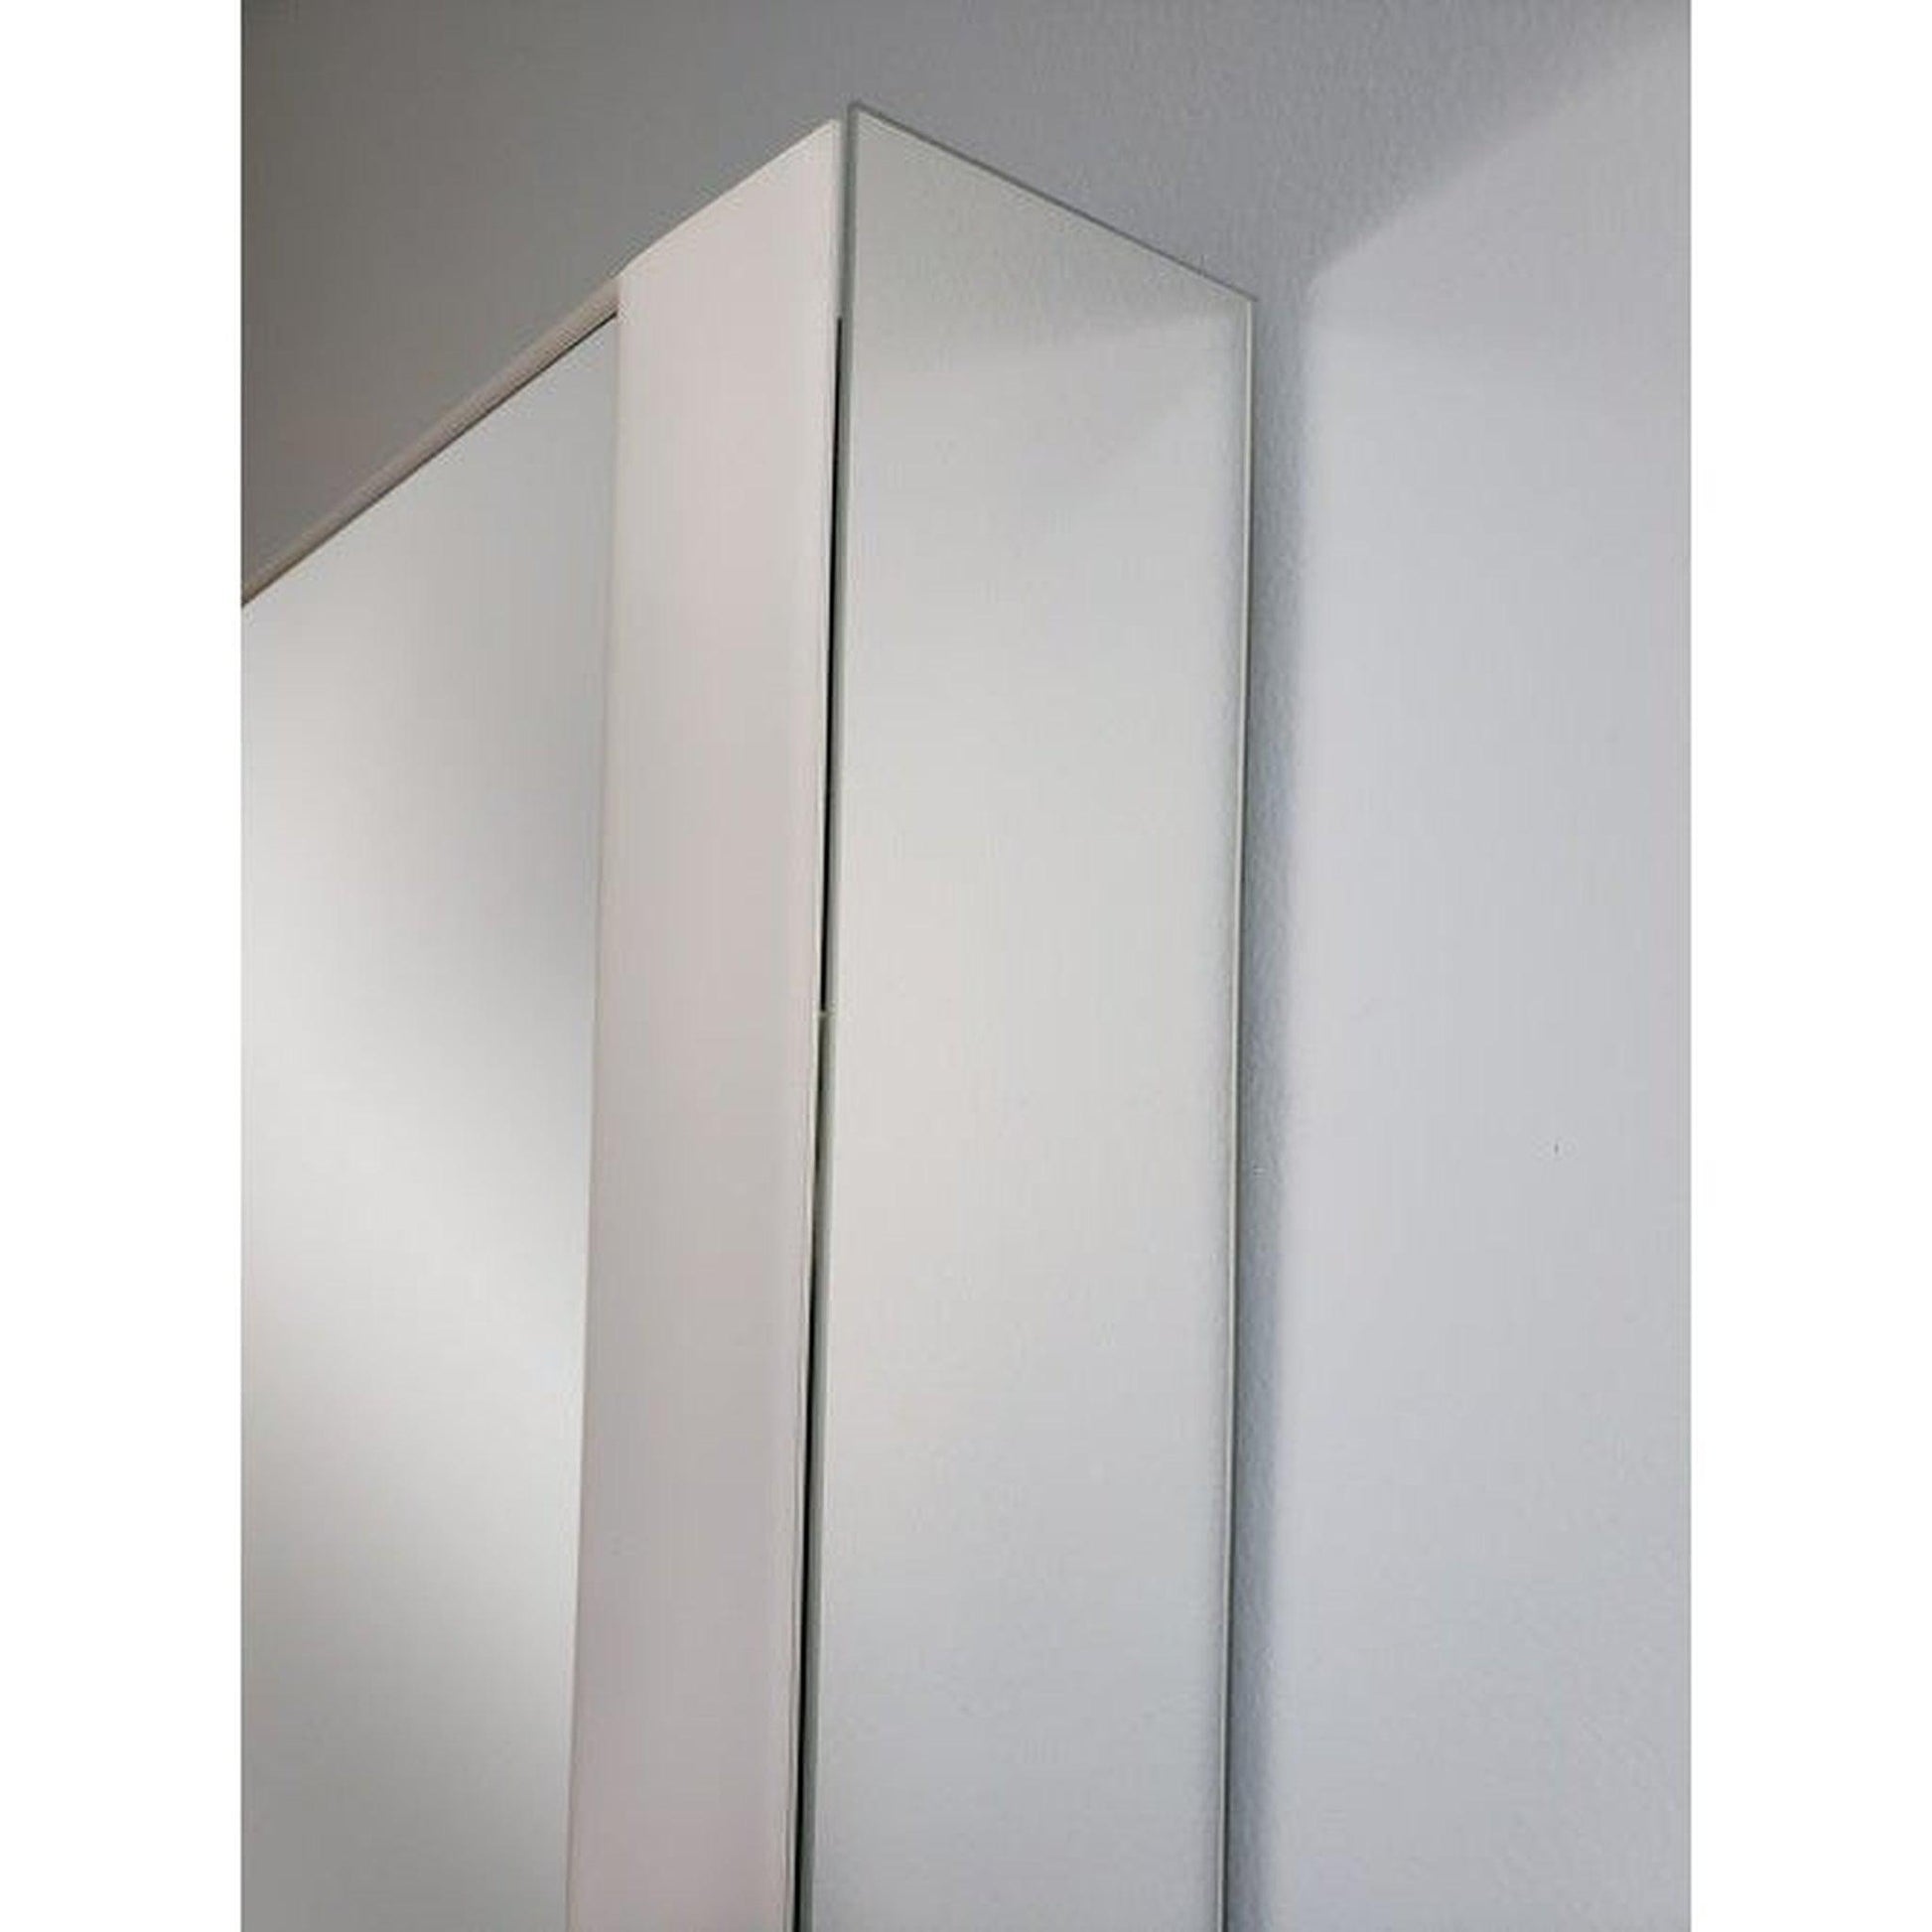 Sidler Quadro 47" x 36" 4000K Double Mirror Doors Anodized Aluminum Medicine Cabinet With Night Light Function, Built-in GFCI Outlet and USB port